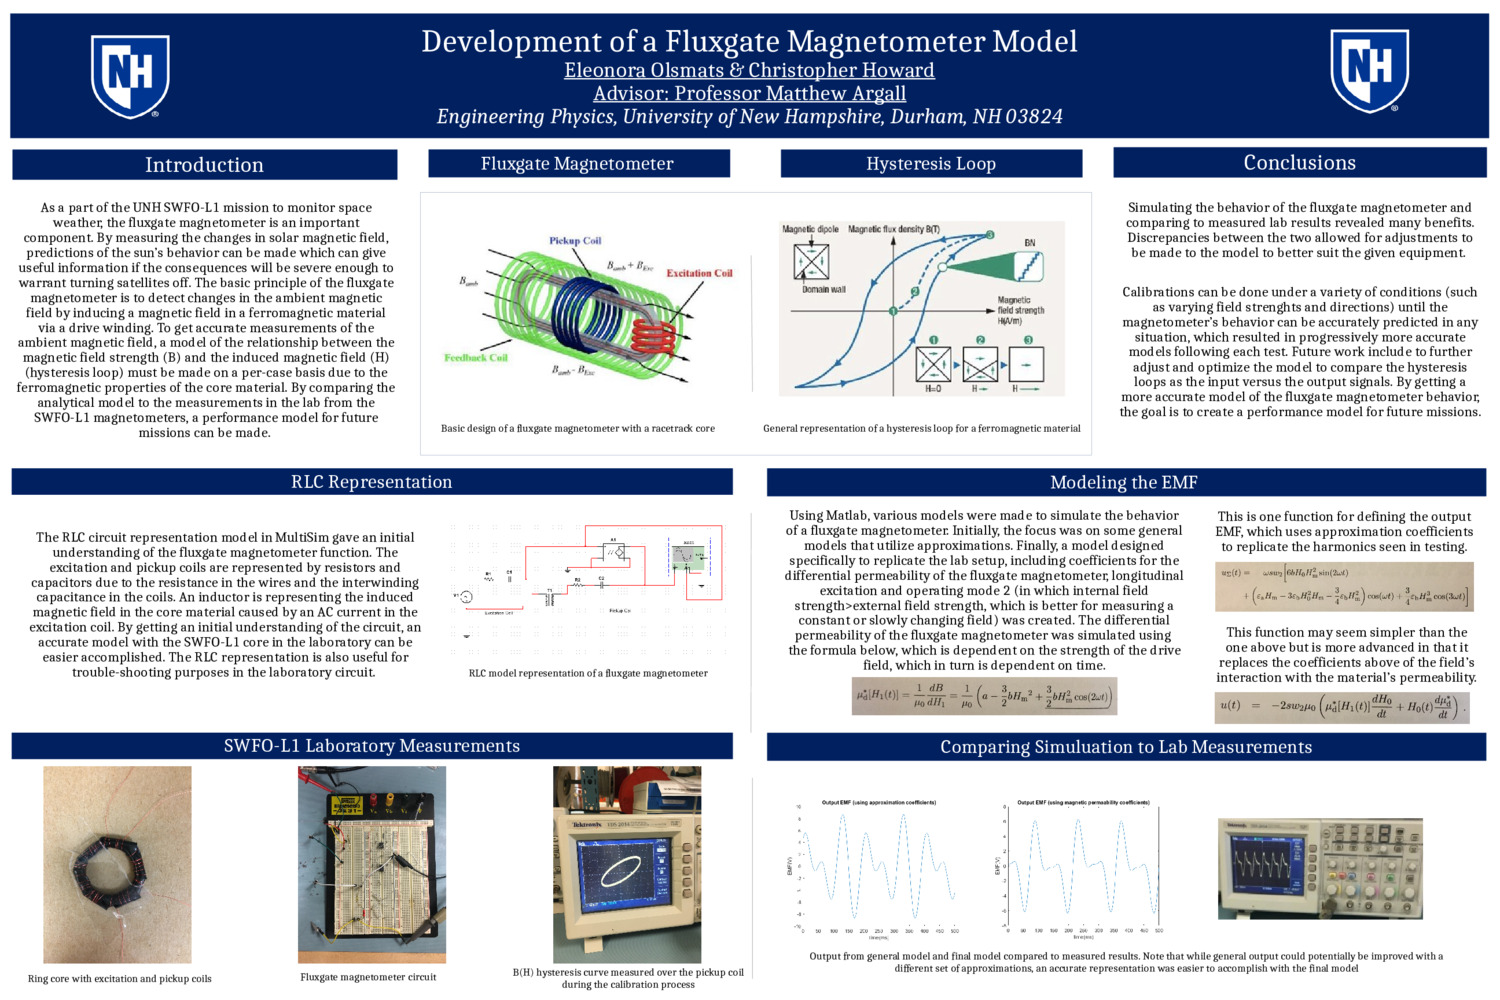 Development Of A Fluxgate Magnetometer Model by eo1036